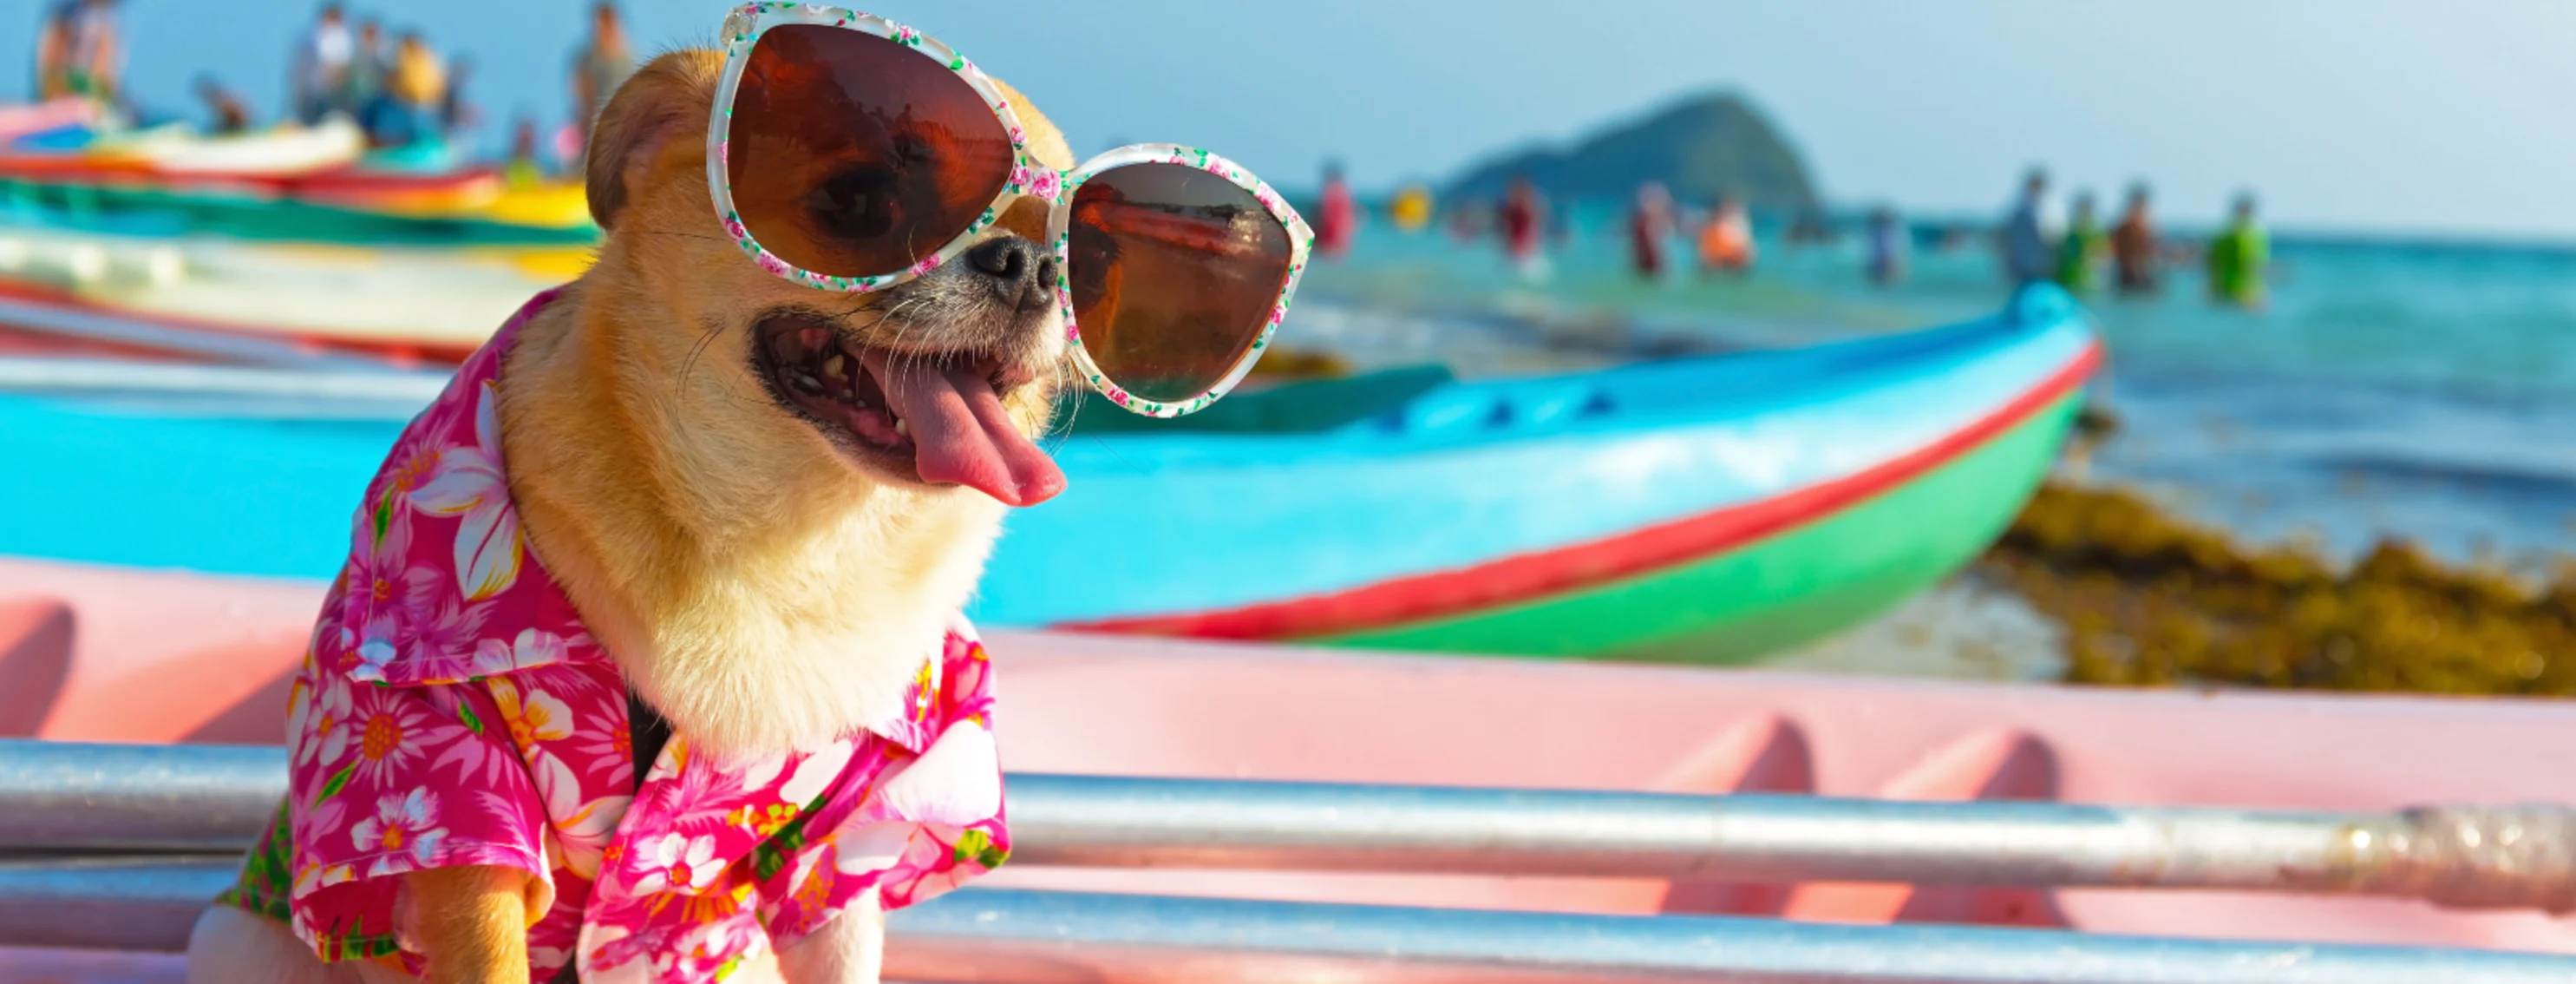 A dog with glasses on a surfboard 